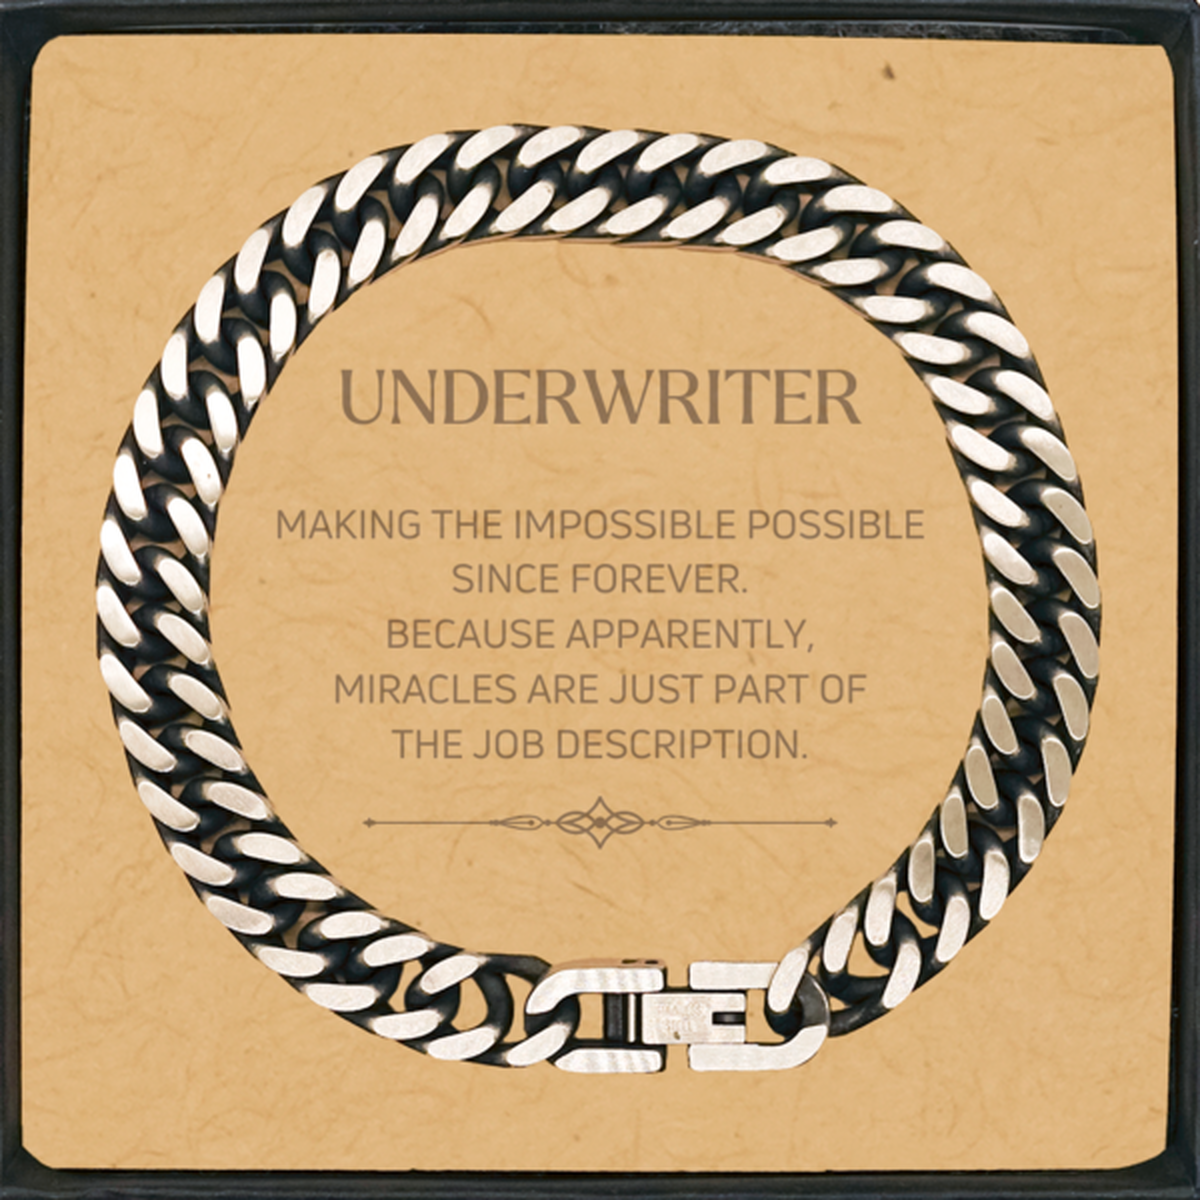 Funny Underwriter Gifts, Miracles are just part of the job description, Inspirational Birthday Cuban Link Chain Bracelet For Underwriter, Men, Women, Coworkers, Friends, Boss